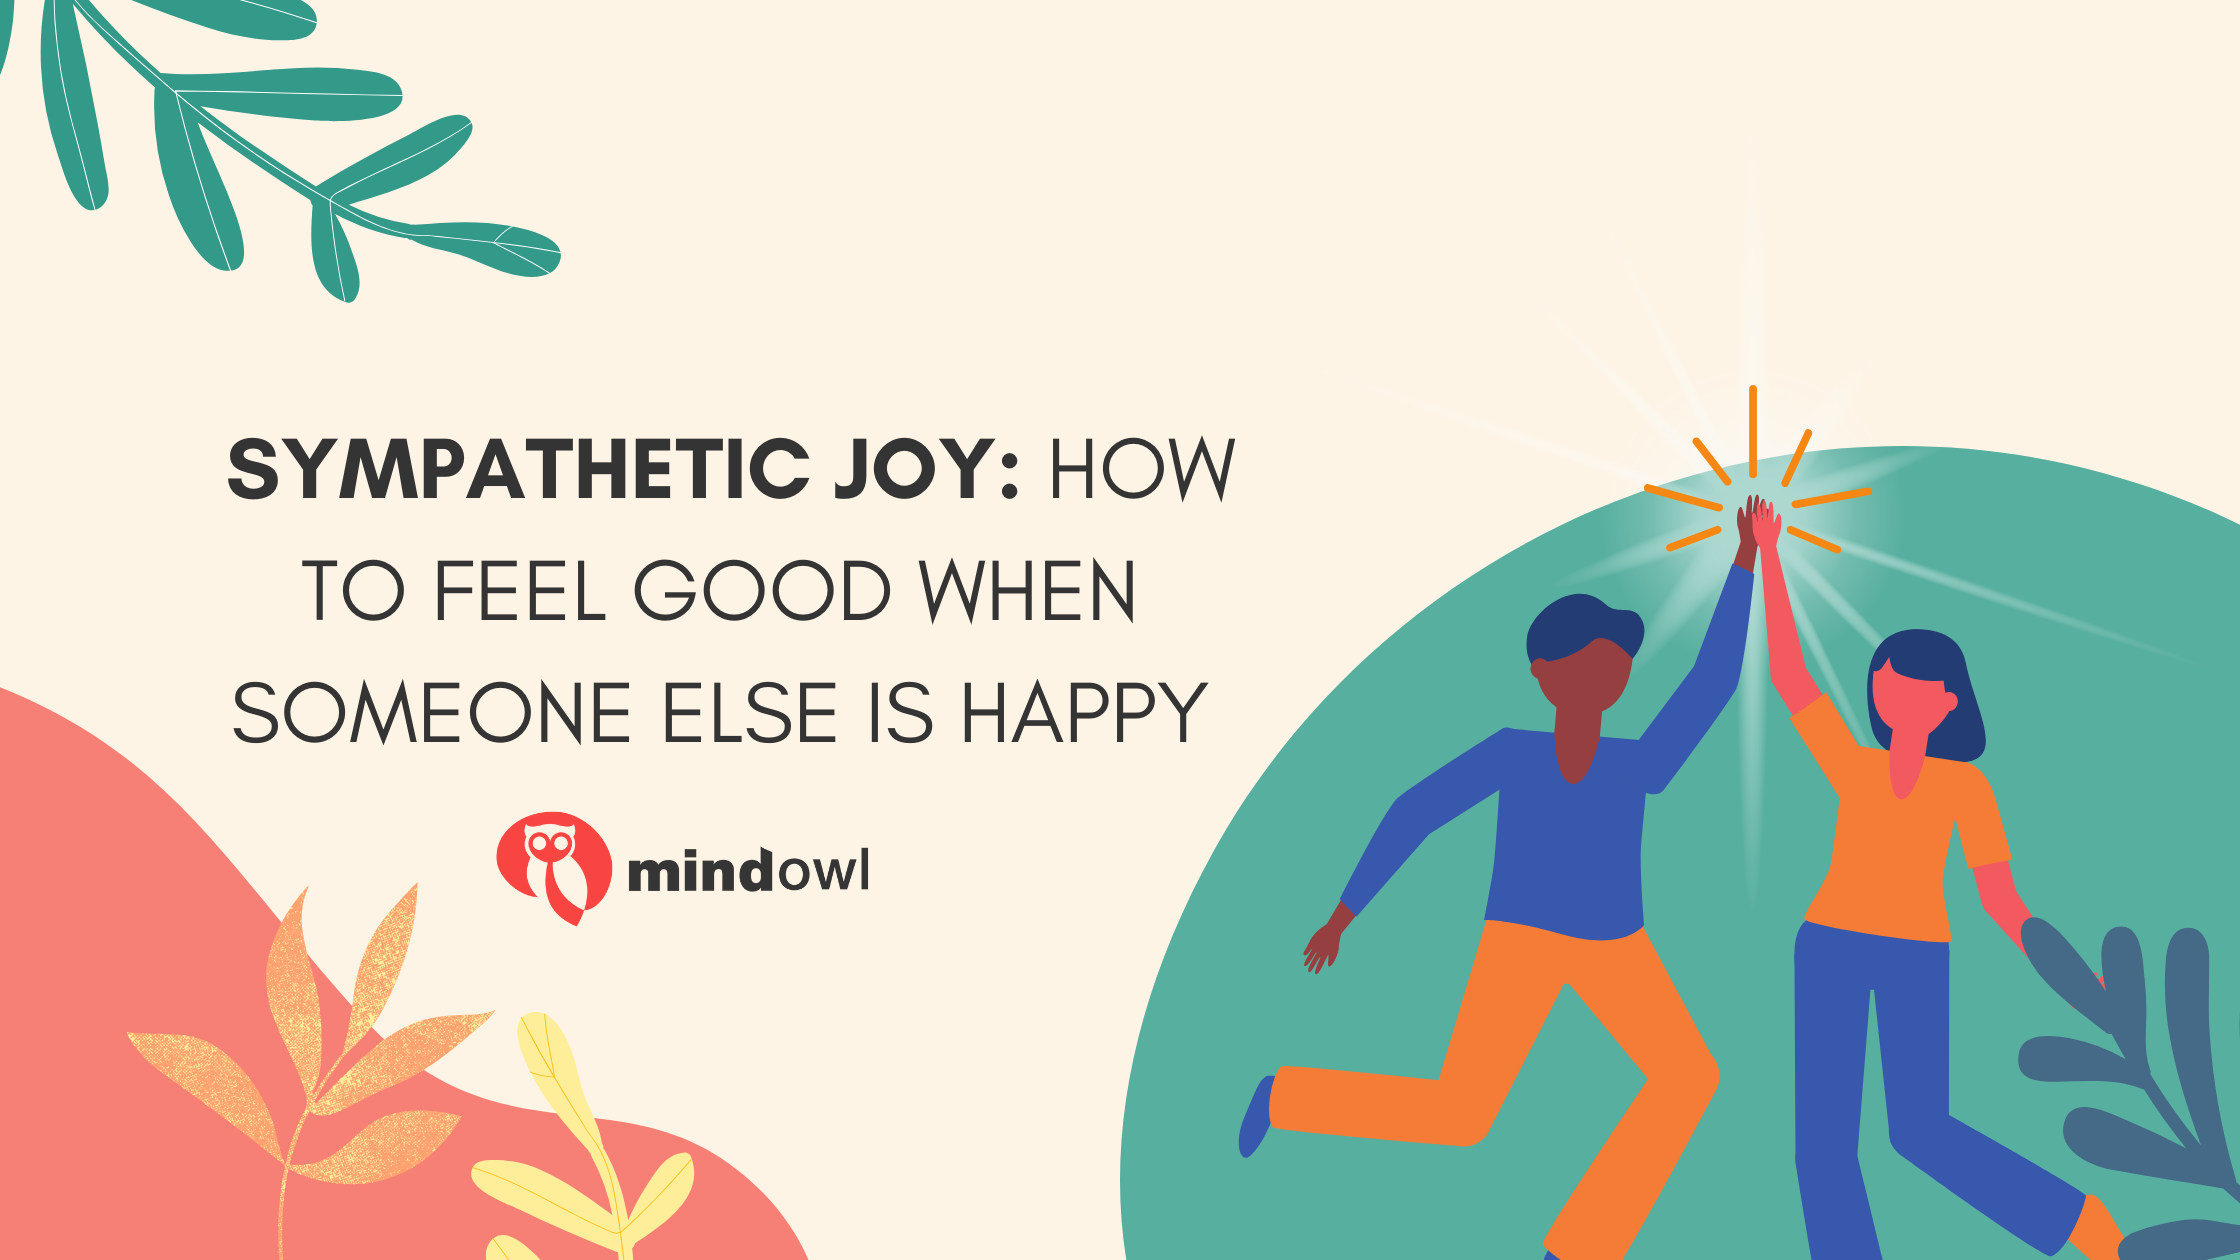 Sympathetic joy: How to feel good when someone else is happy